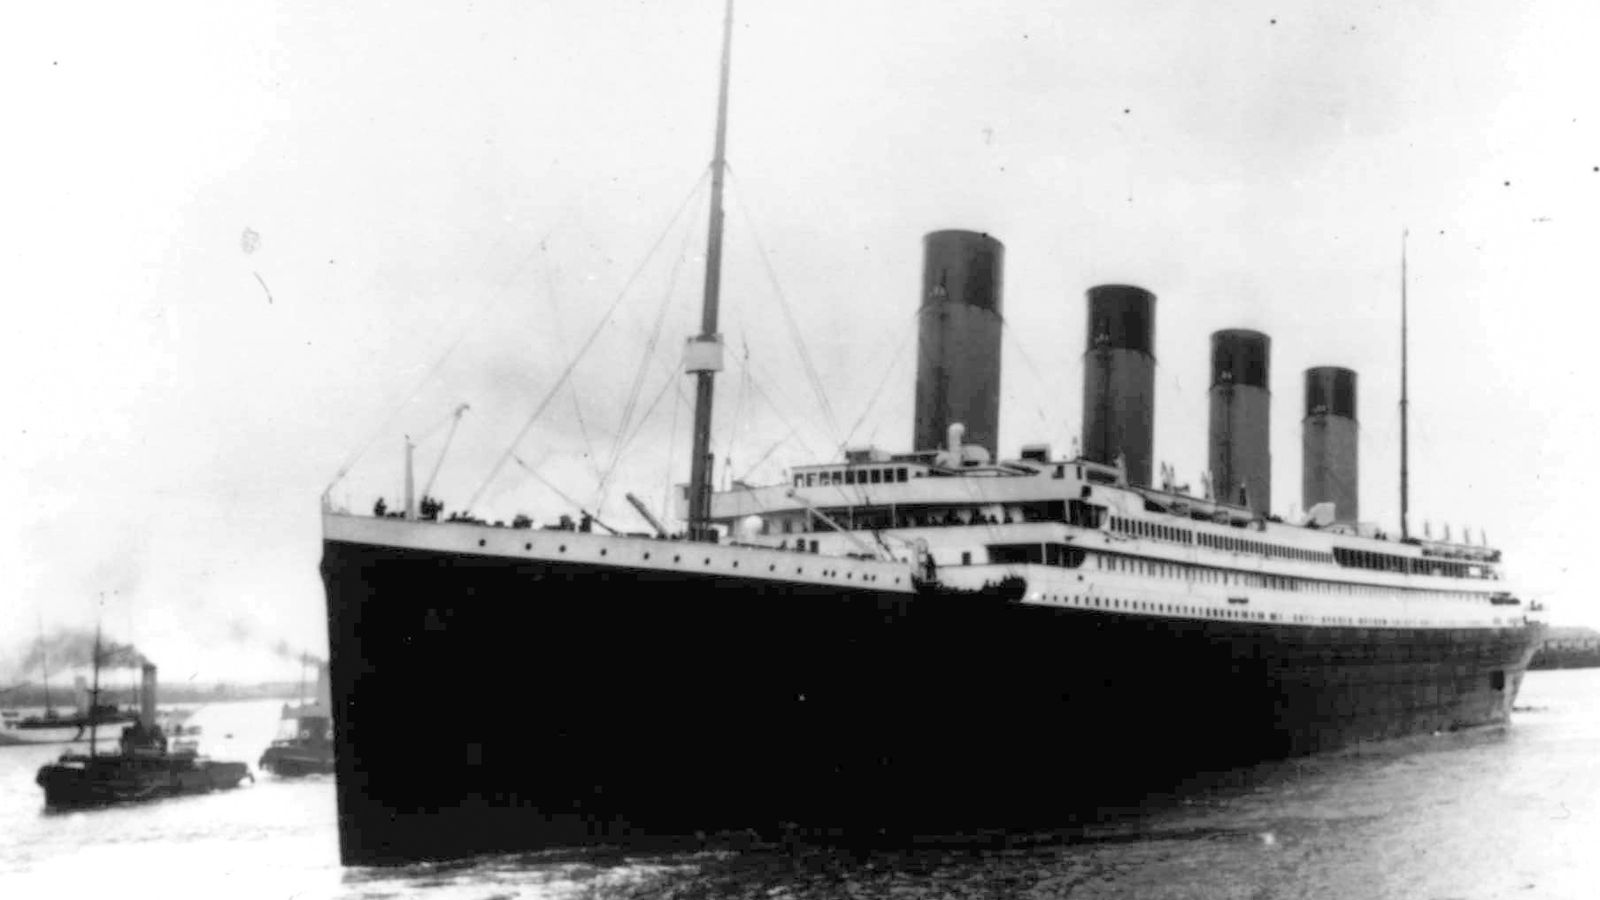 gold watch recovered from body of richest man on the titanic sells for £1.2m